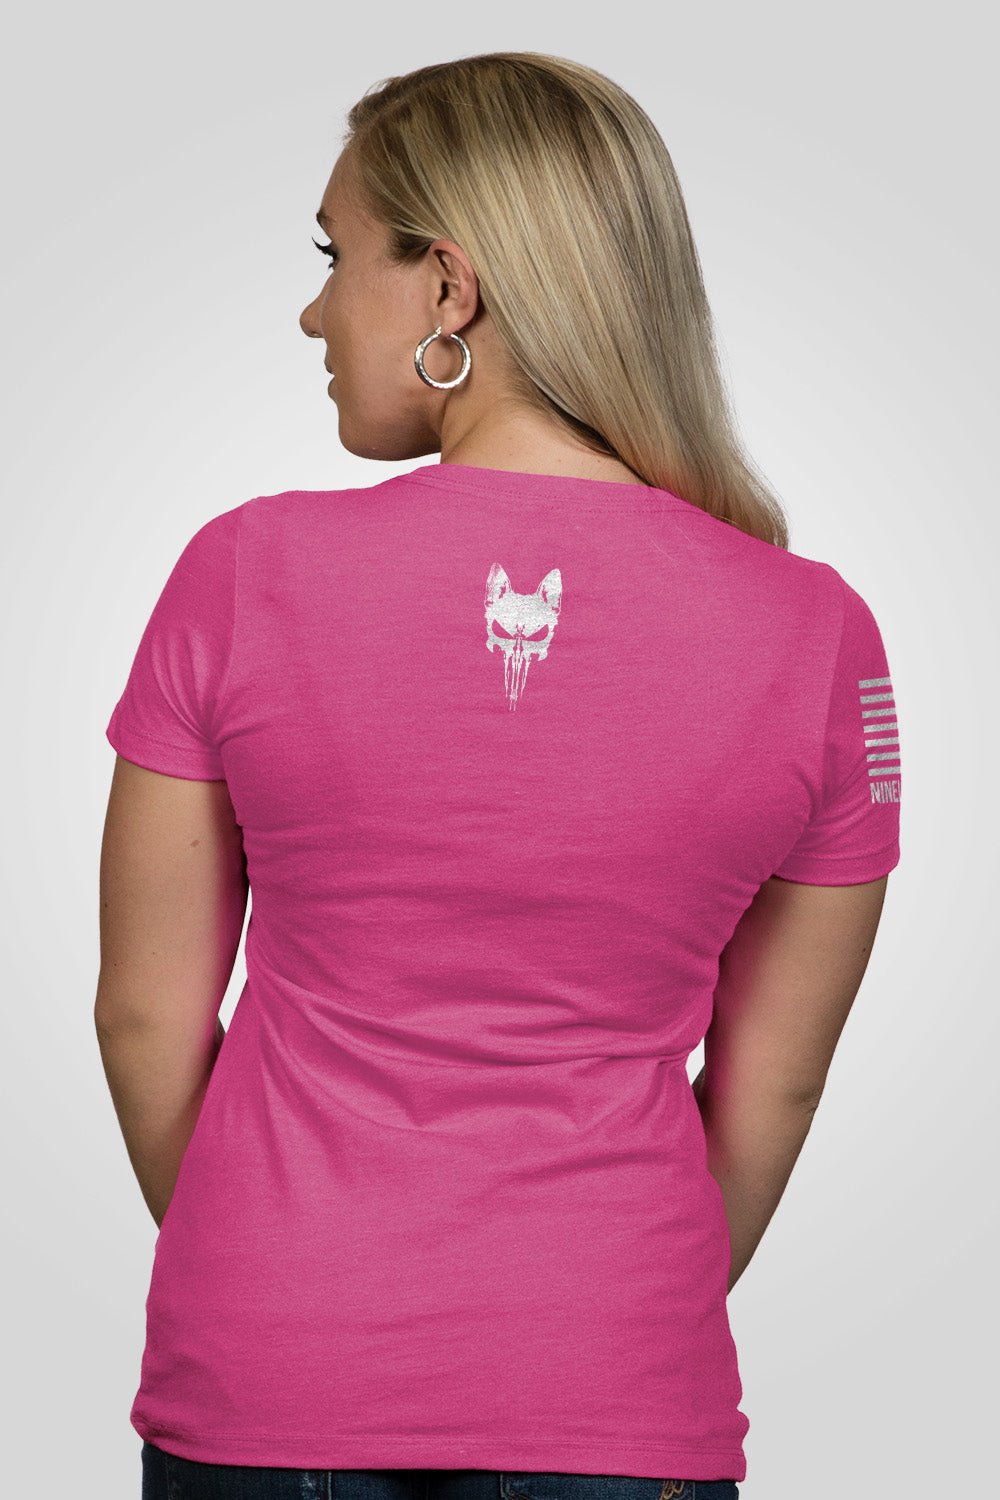 Women's Relaxed Fit V-Neck Shirt - Drink Coffee Pet Dogs - Nine Line Apparel